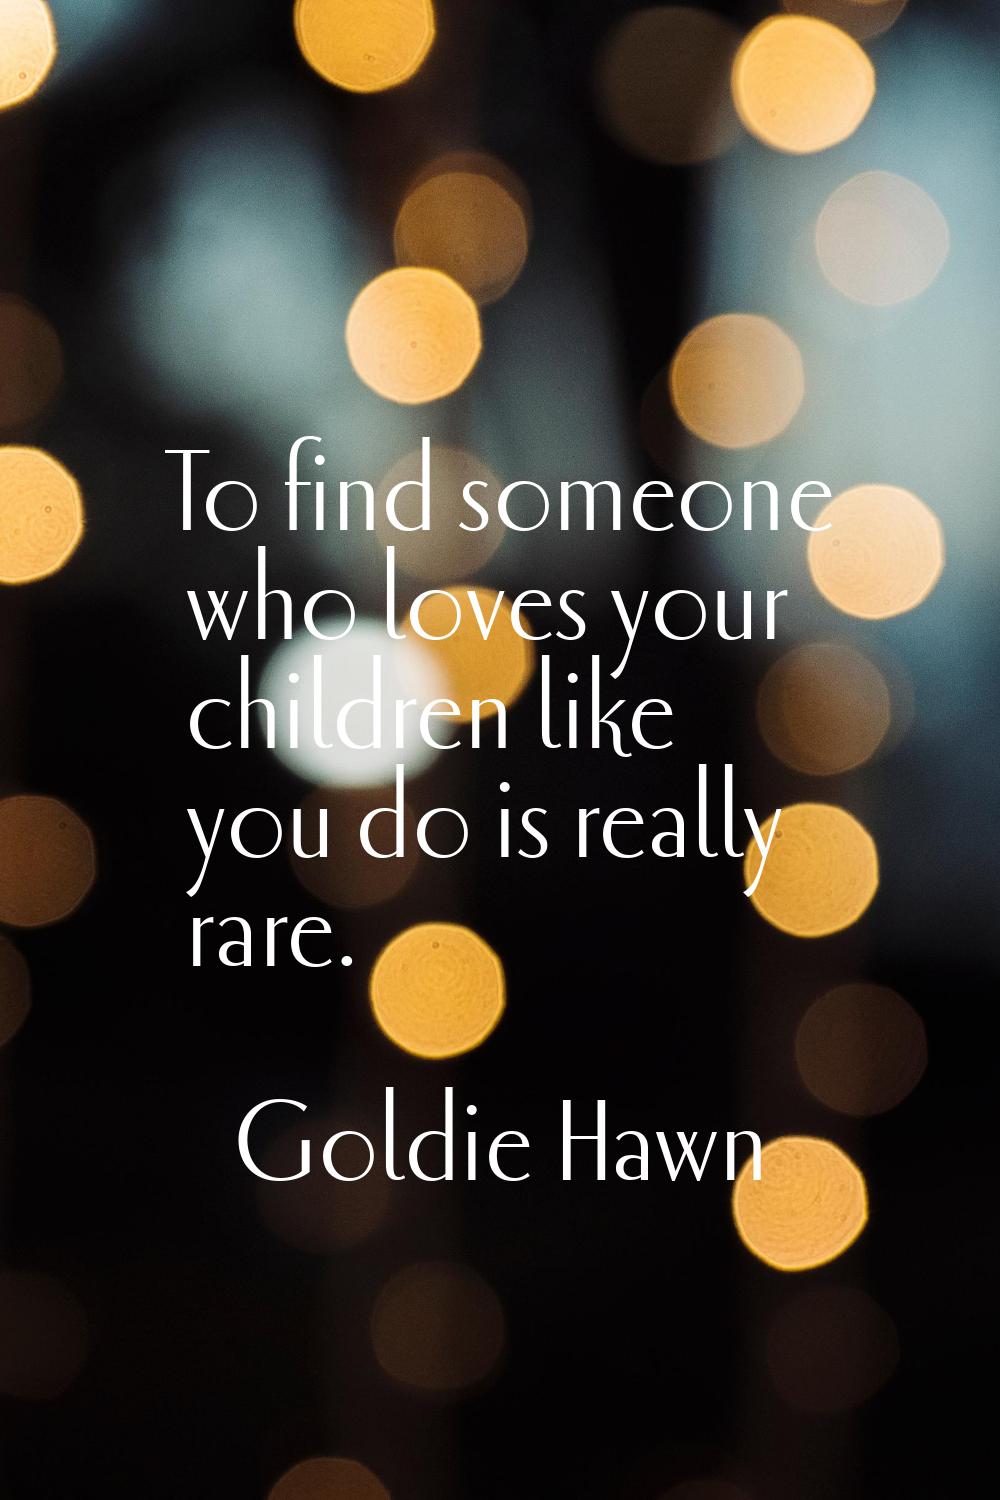 To find someone who loves your children like you do is really rare.